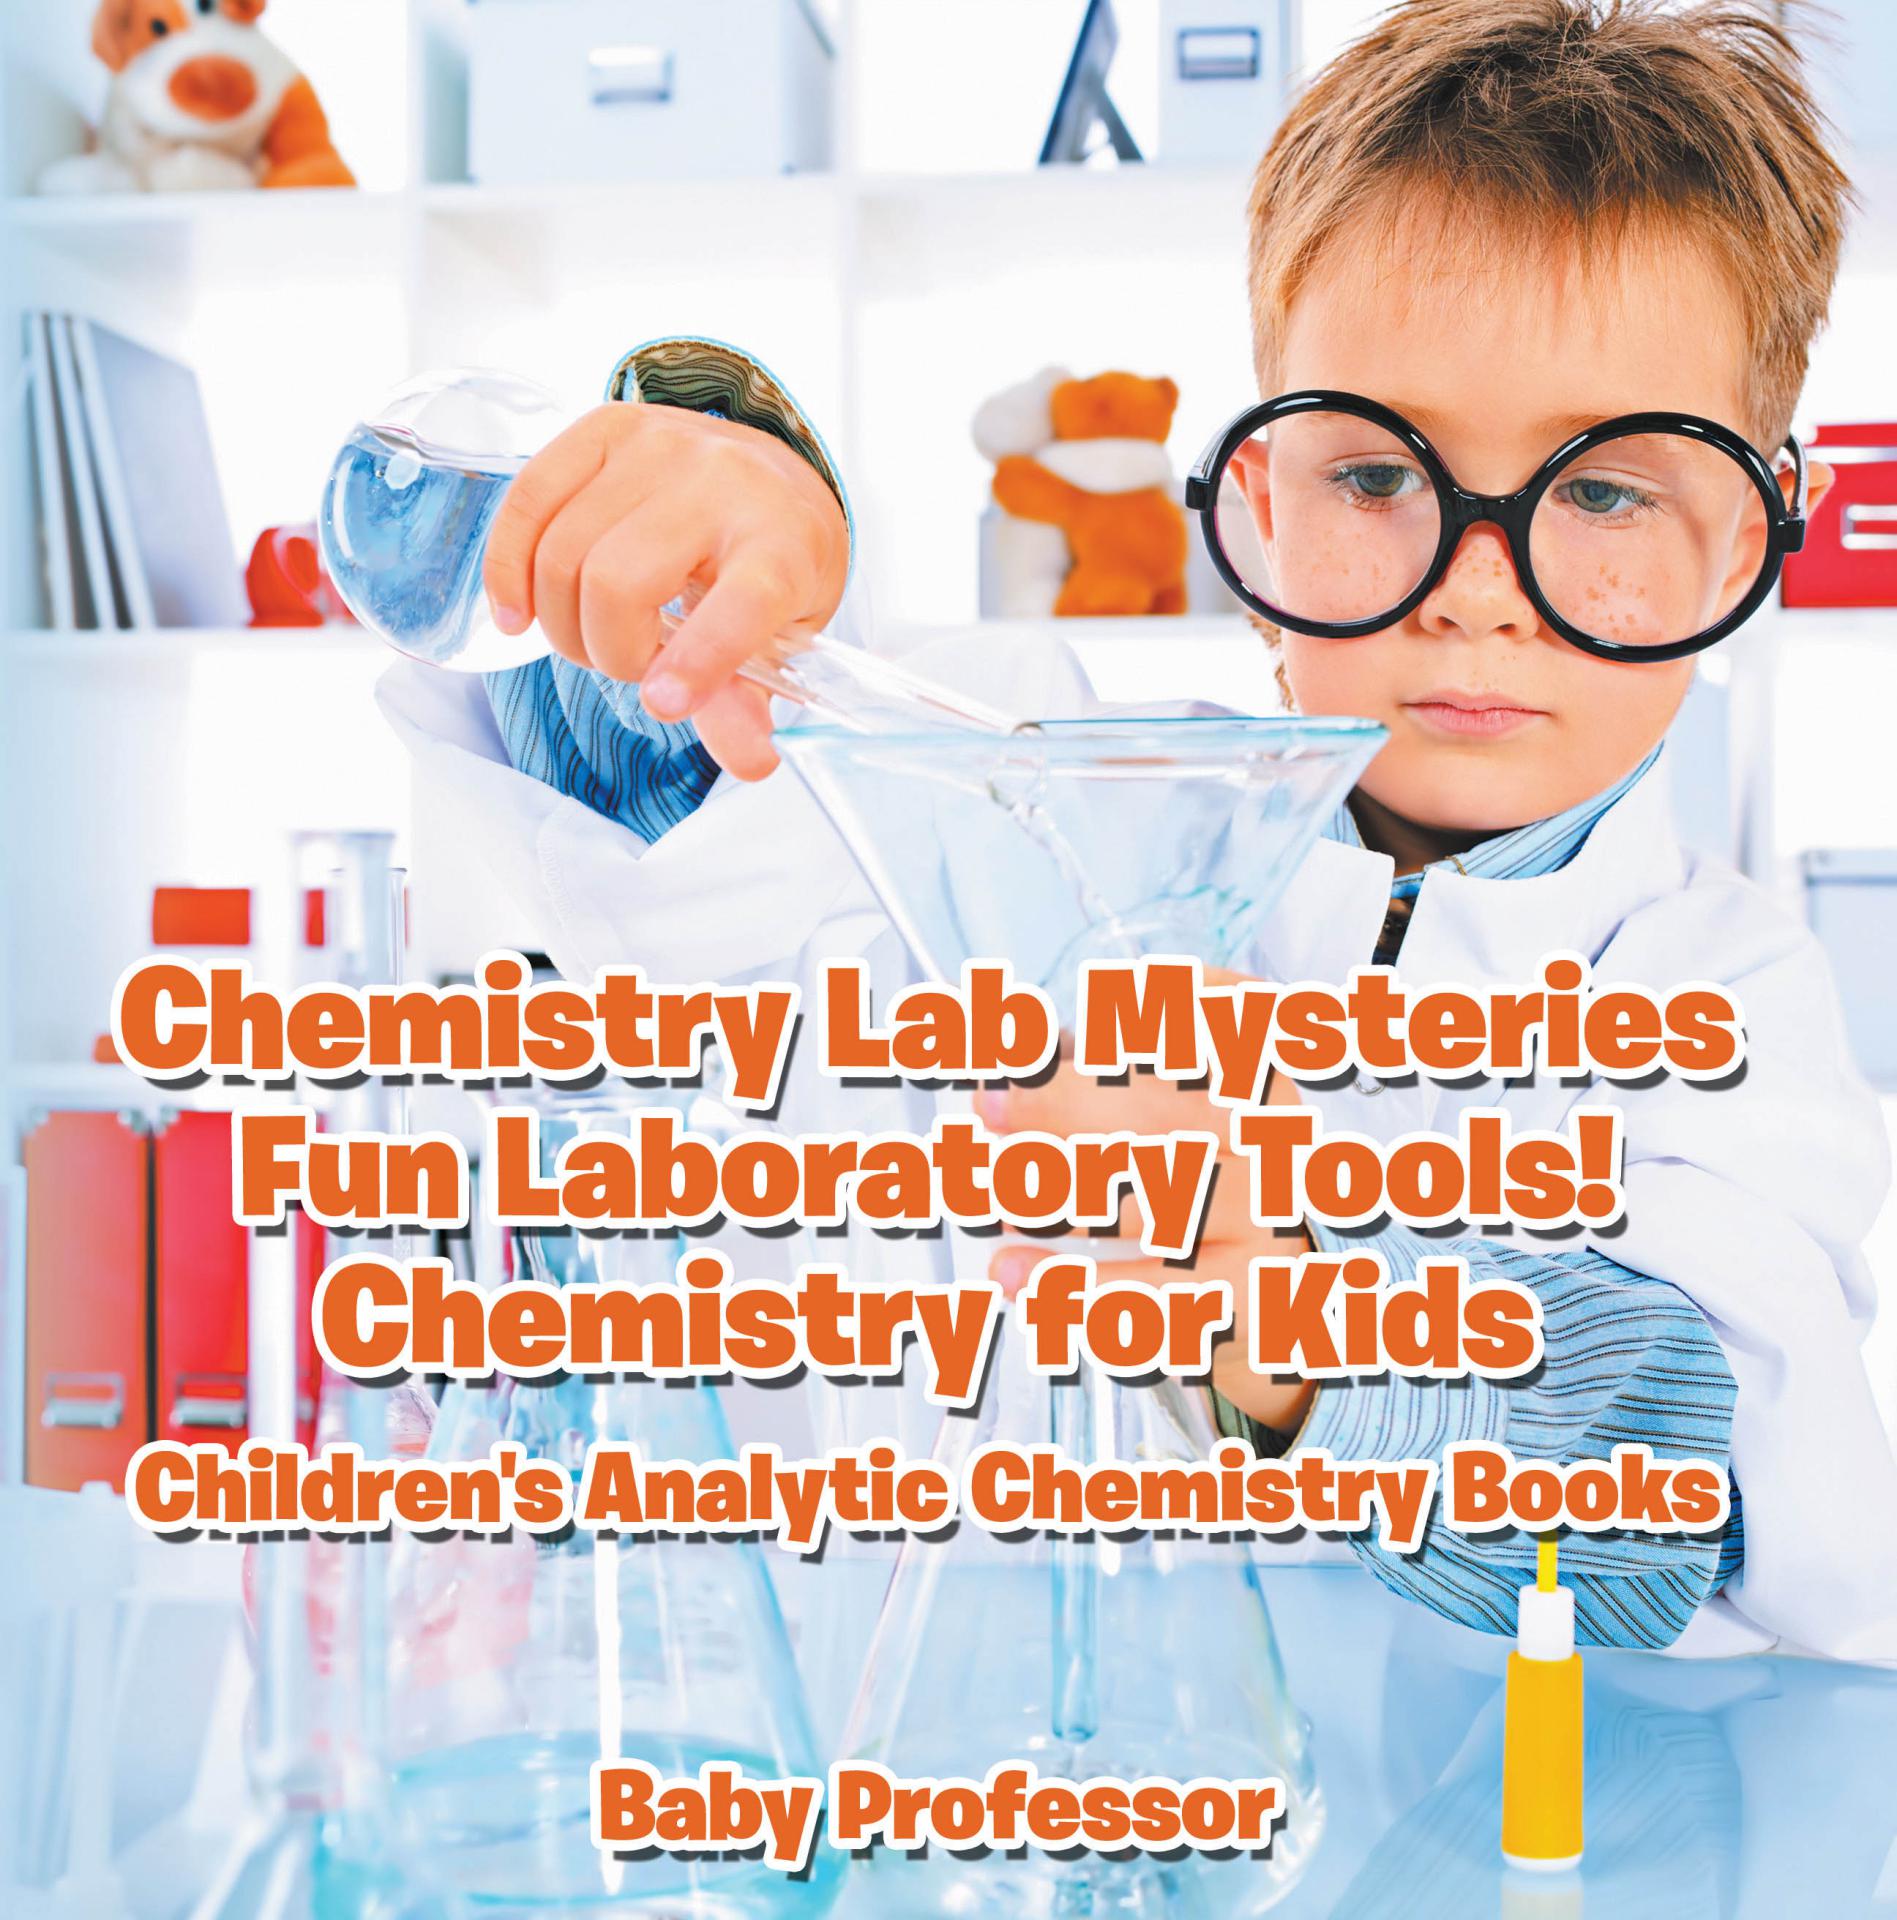 Chemistry Lab Mysteries, Fun Laboratory Tools! Chemistry for Kids - Children's Analytic Chemistry Books by Baby Professor